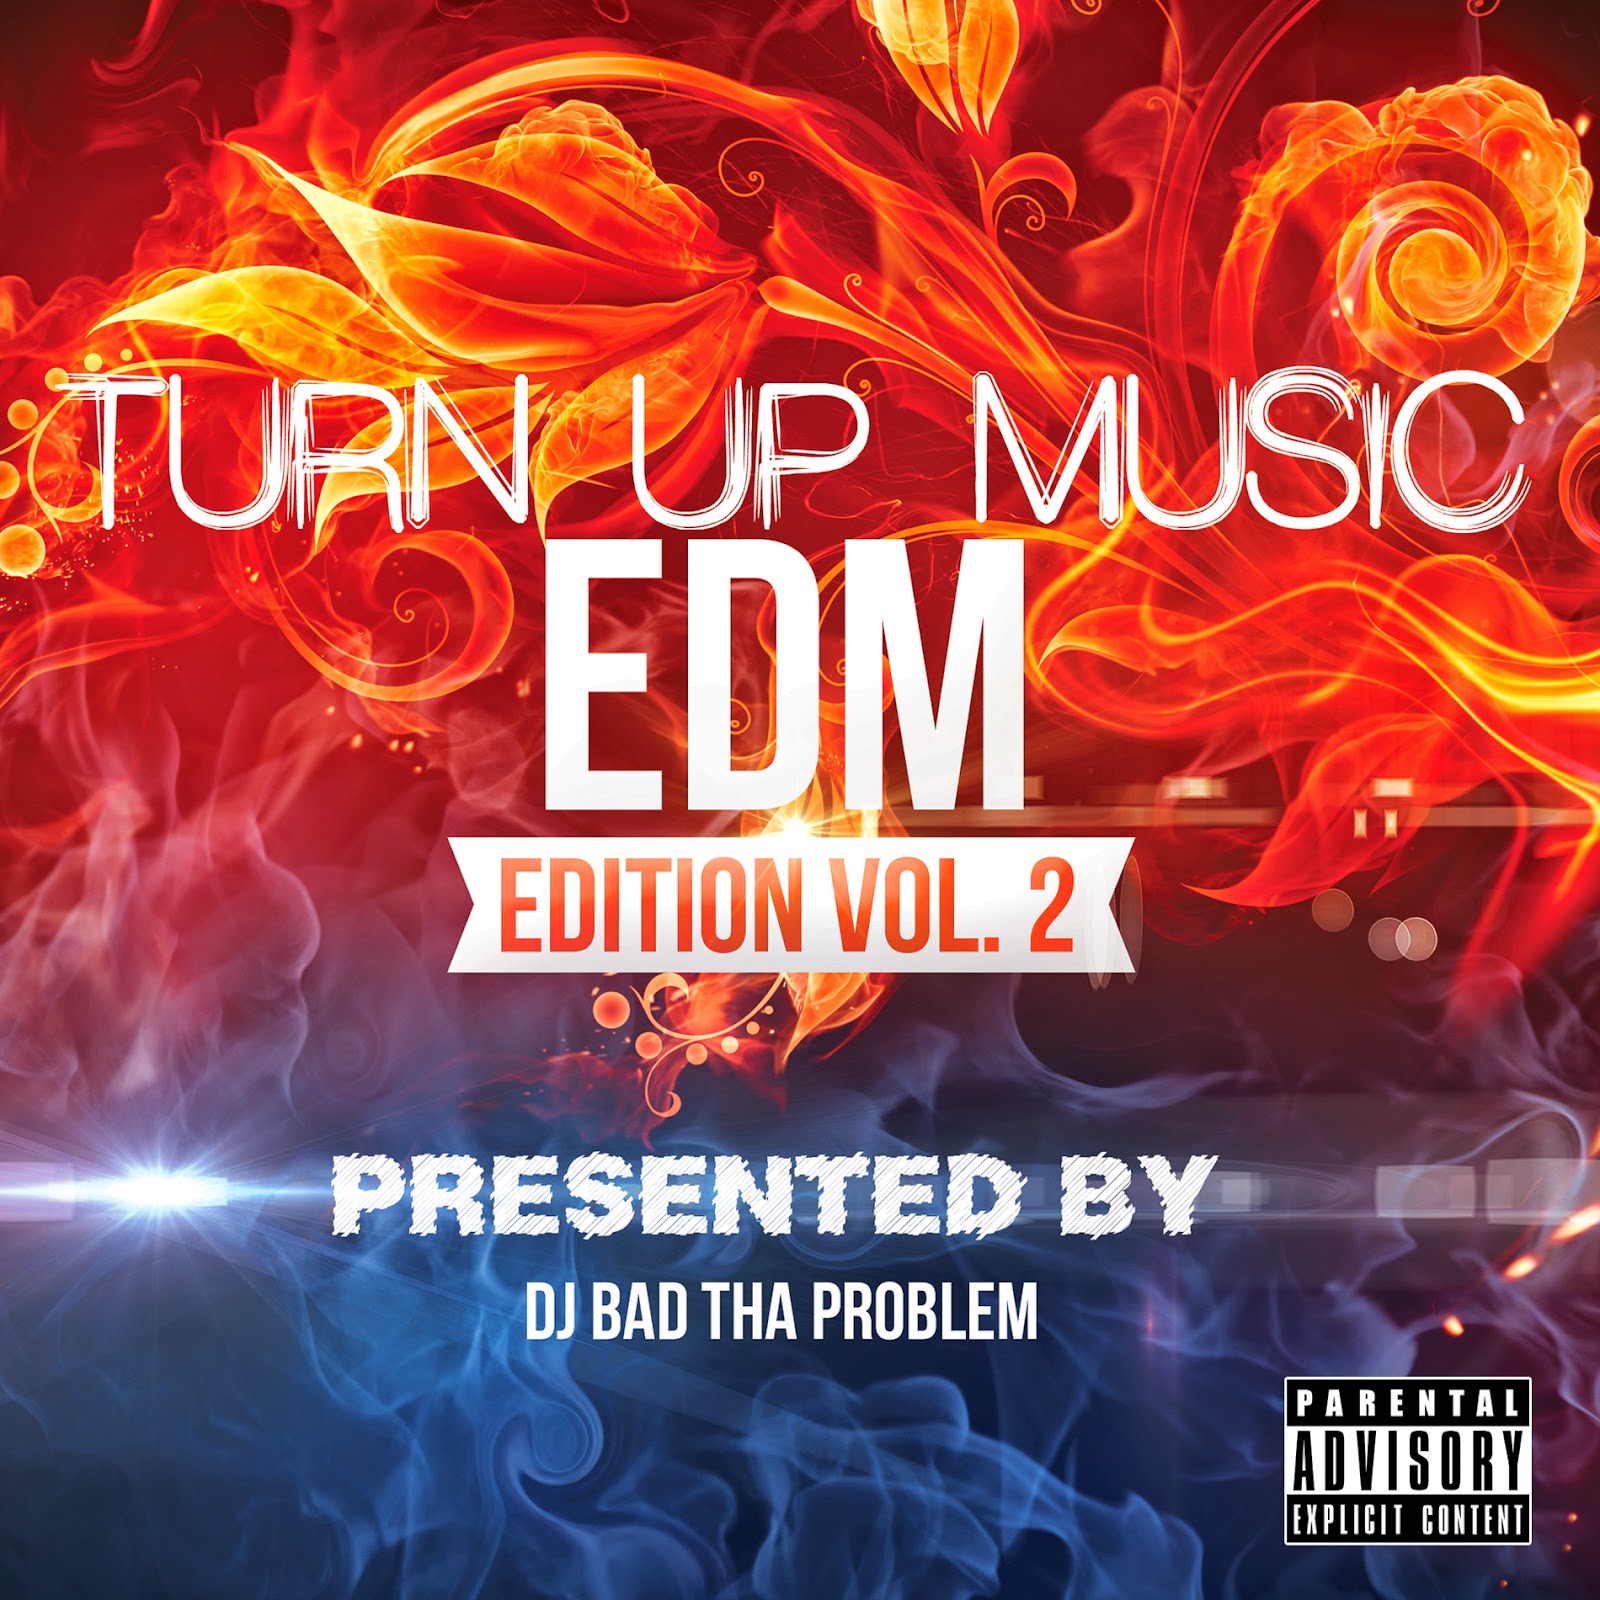 Turn my music. Music Edition. Turn up the Music. Music up. Turn up the Music turn down the Drama.